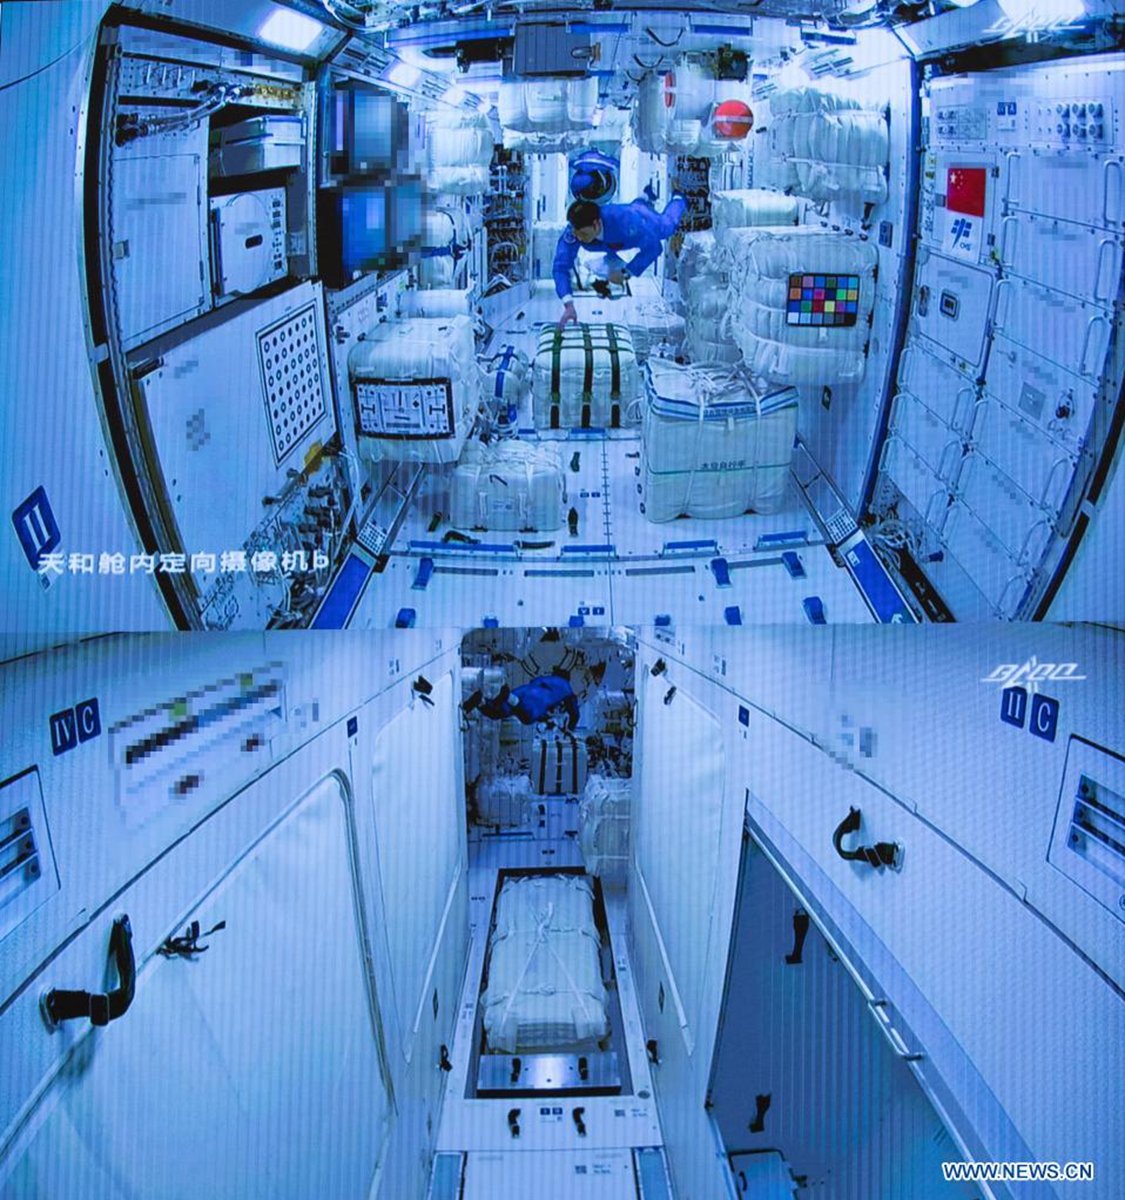 Screen image captured at Beijing Aerospace Control Center in Beijing, capital of China, June 17, 2021 shows three Chinese astronauts onboard the Shenzhou-12 spaceship entering the space station core module Tianhe.